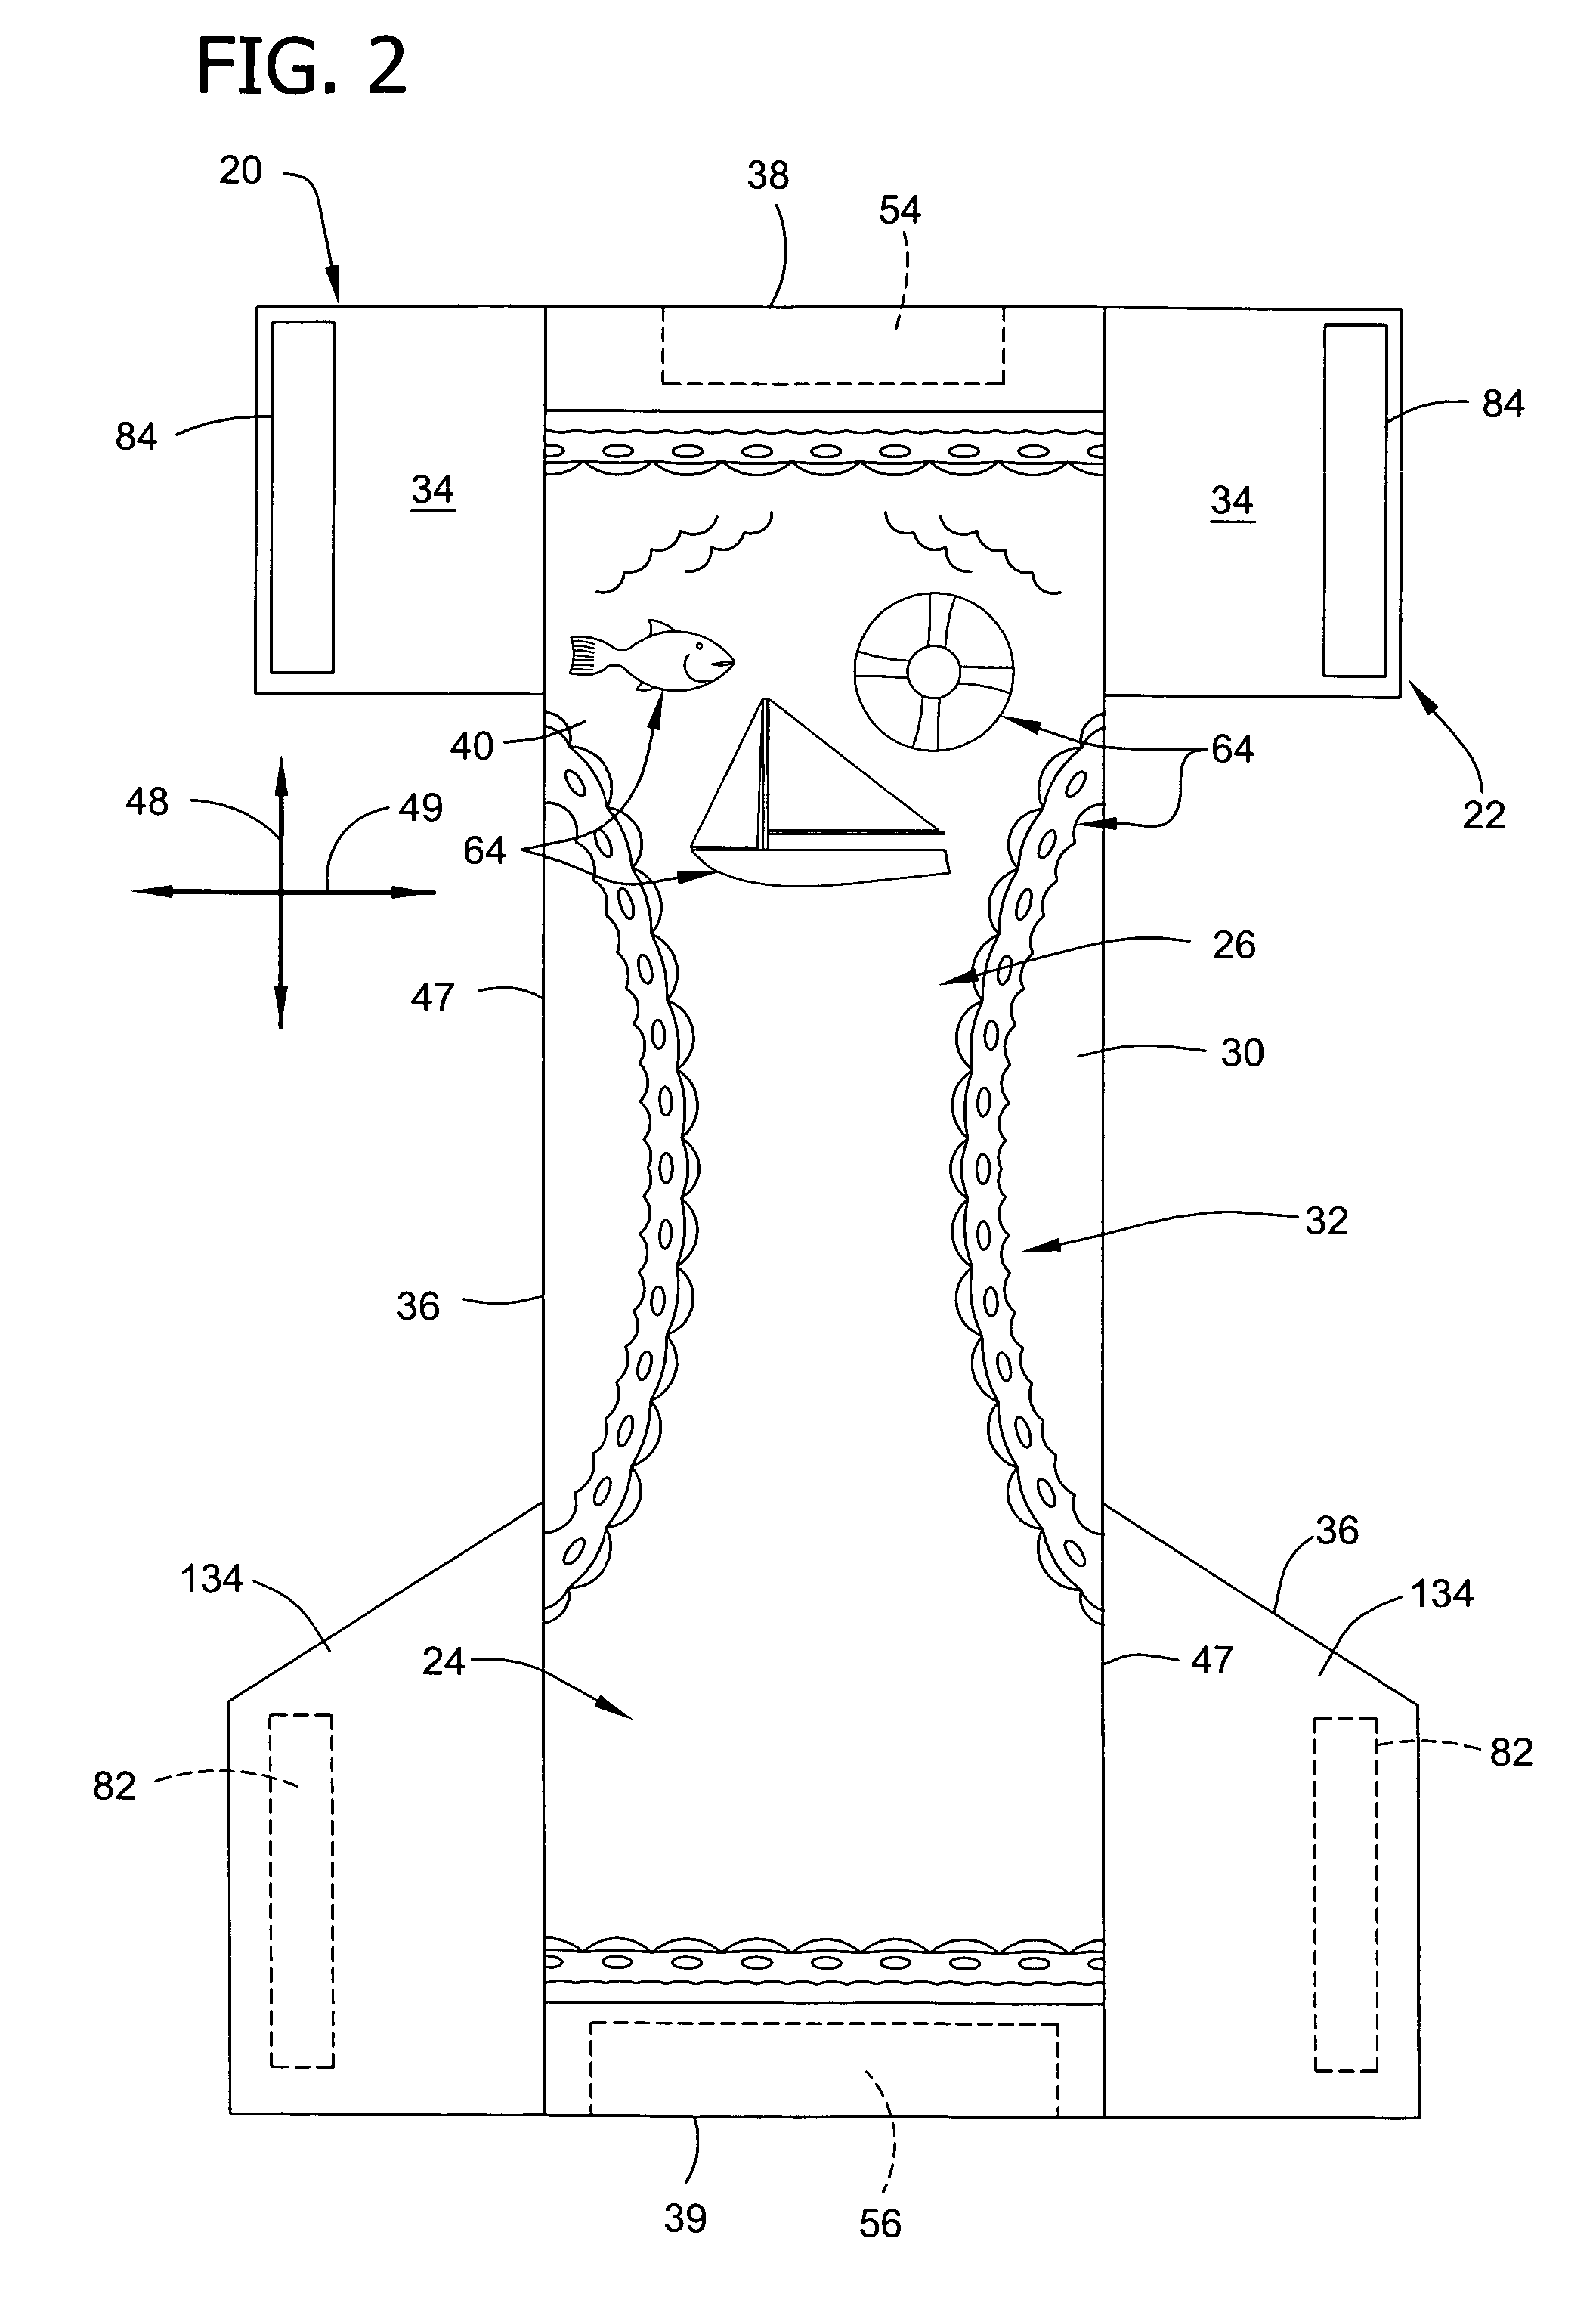 Absorbent article component having applied graphic, and process for making same